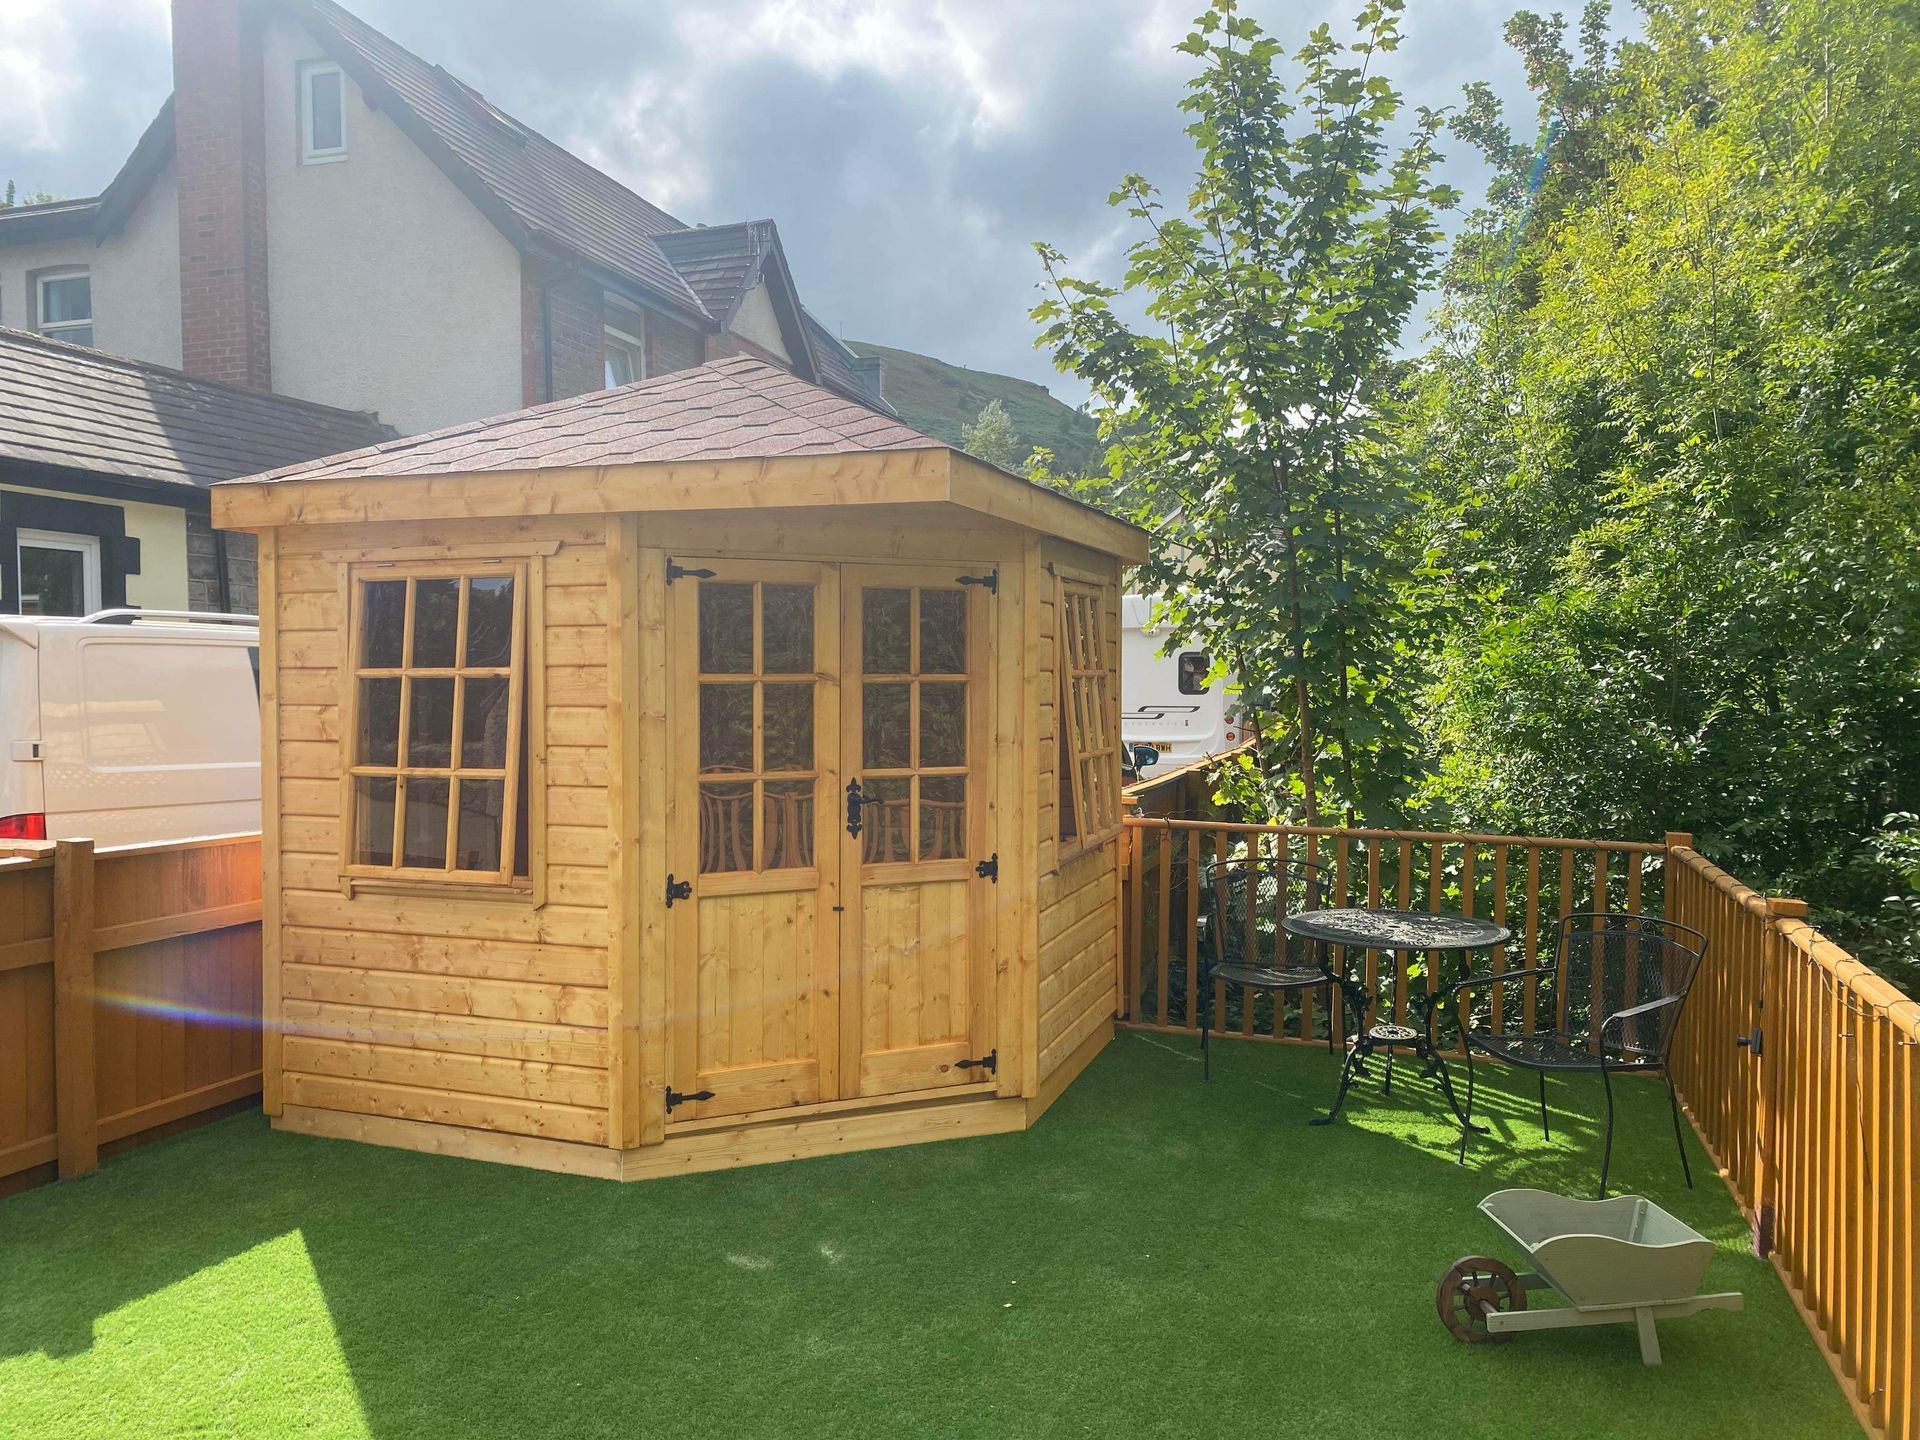 9' x 9' Corner summerhouse with red shingles and opening 9 pane windows. Lined and insulated.